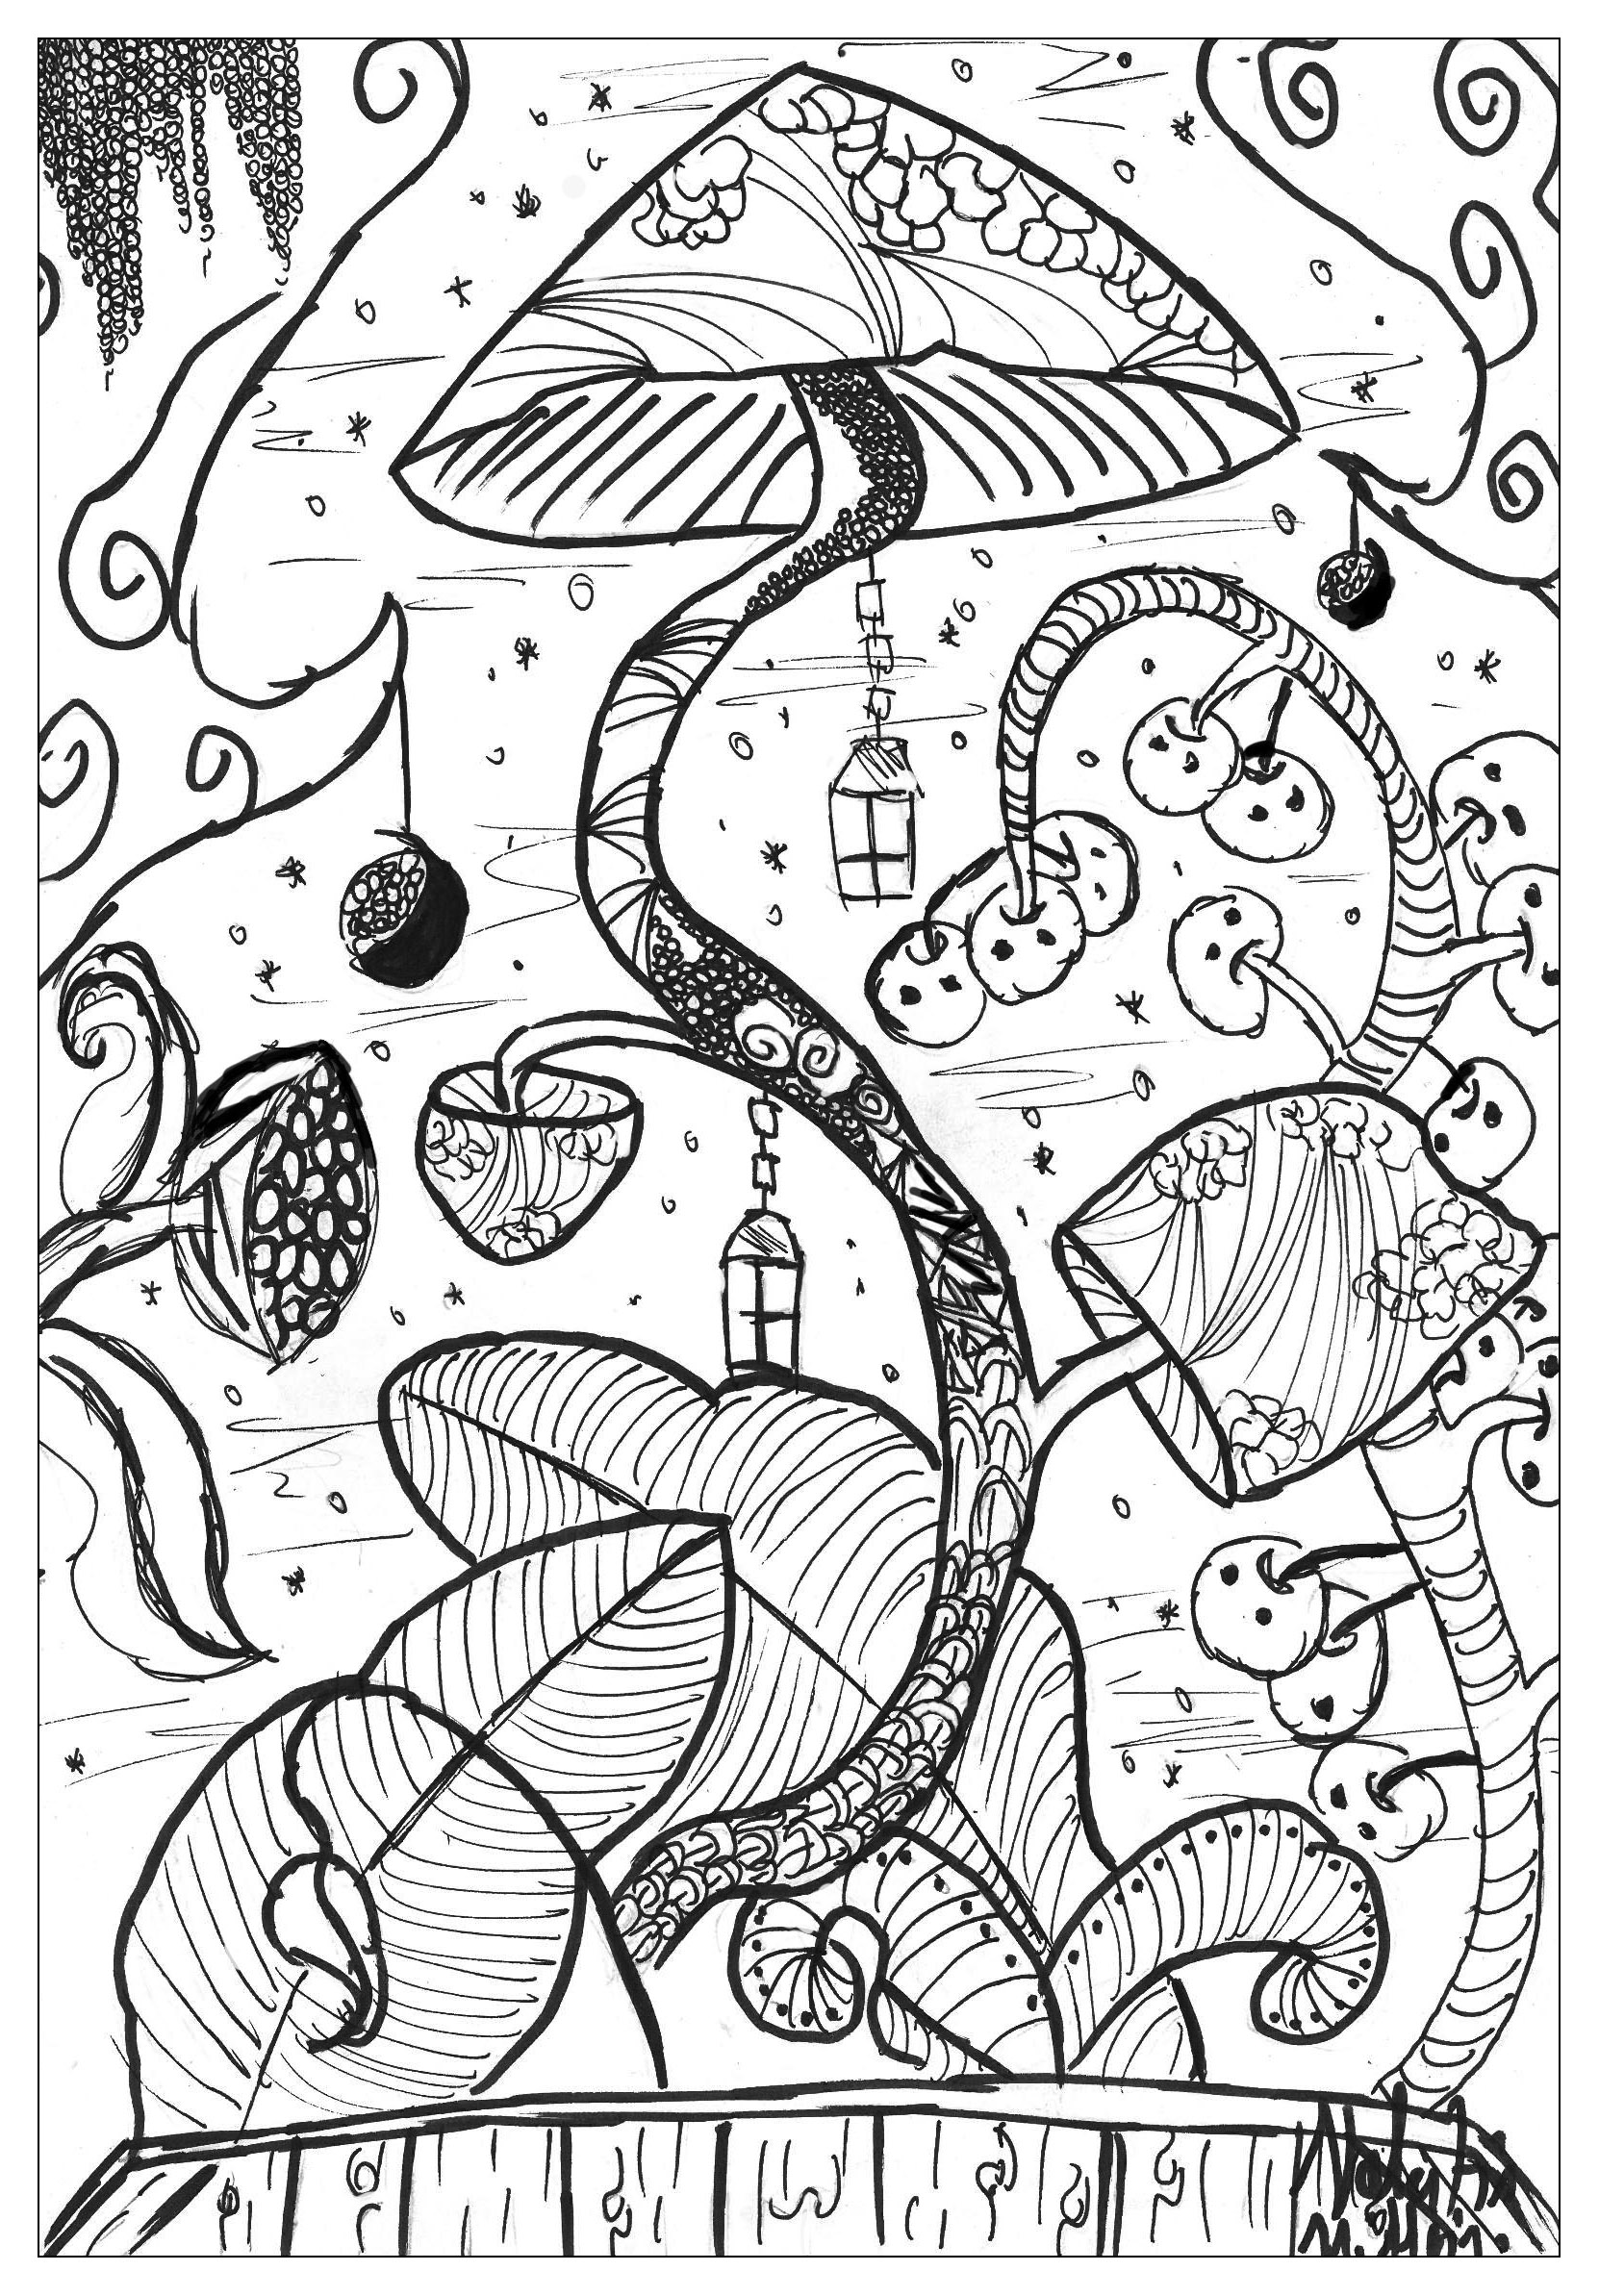 Download Mushroom valentin - Flowers Adult Coloring Pages - Page 2